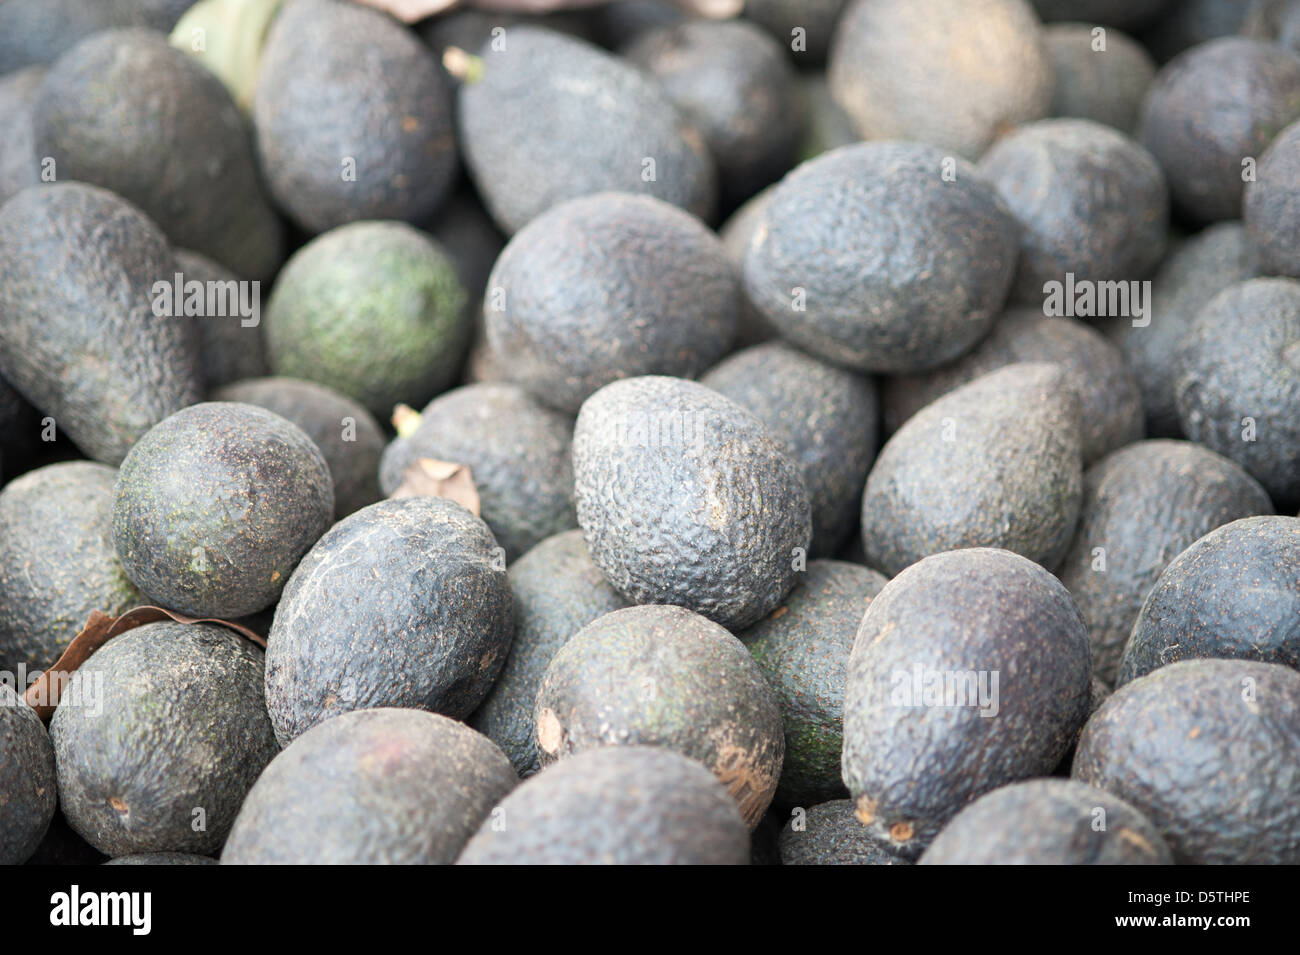 Avocados at Lo Valledor central wholesale produce market in Santiago, Chile Stock Photo